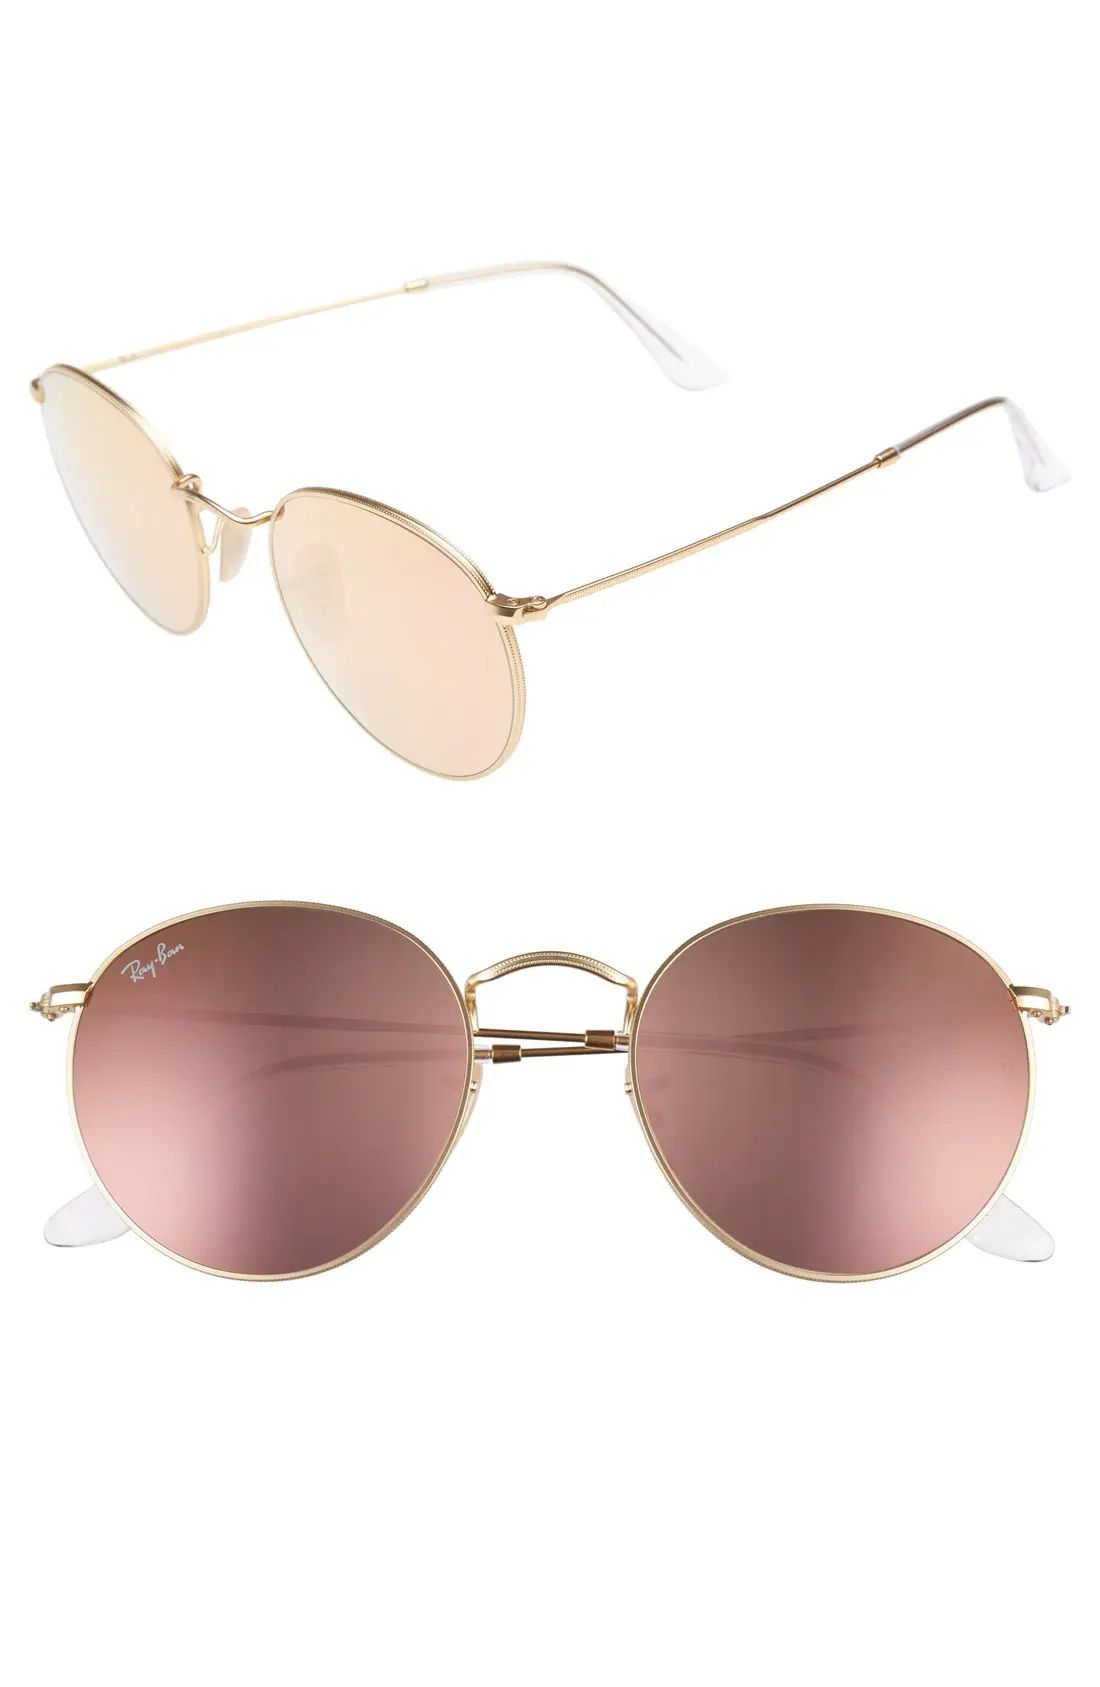 Ray-Ban Icons 53Mm Retro Sunglasses - Brown/ Pink | Nordstrom